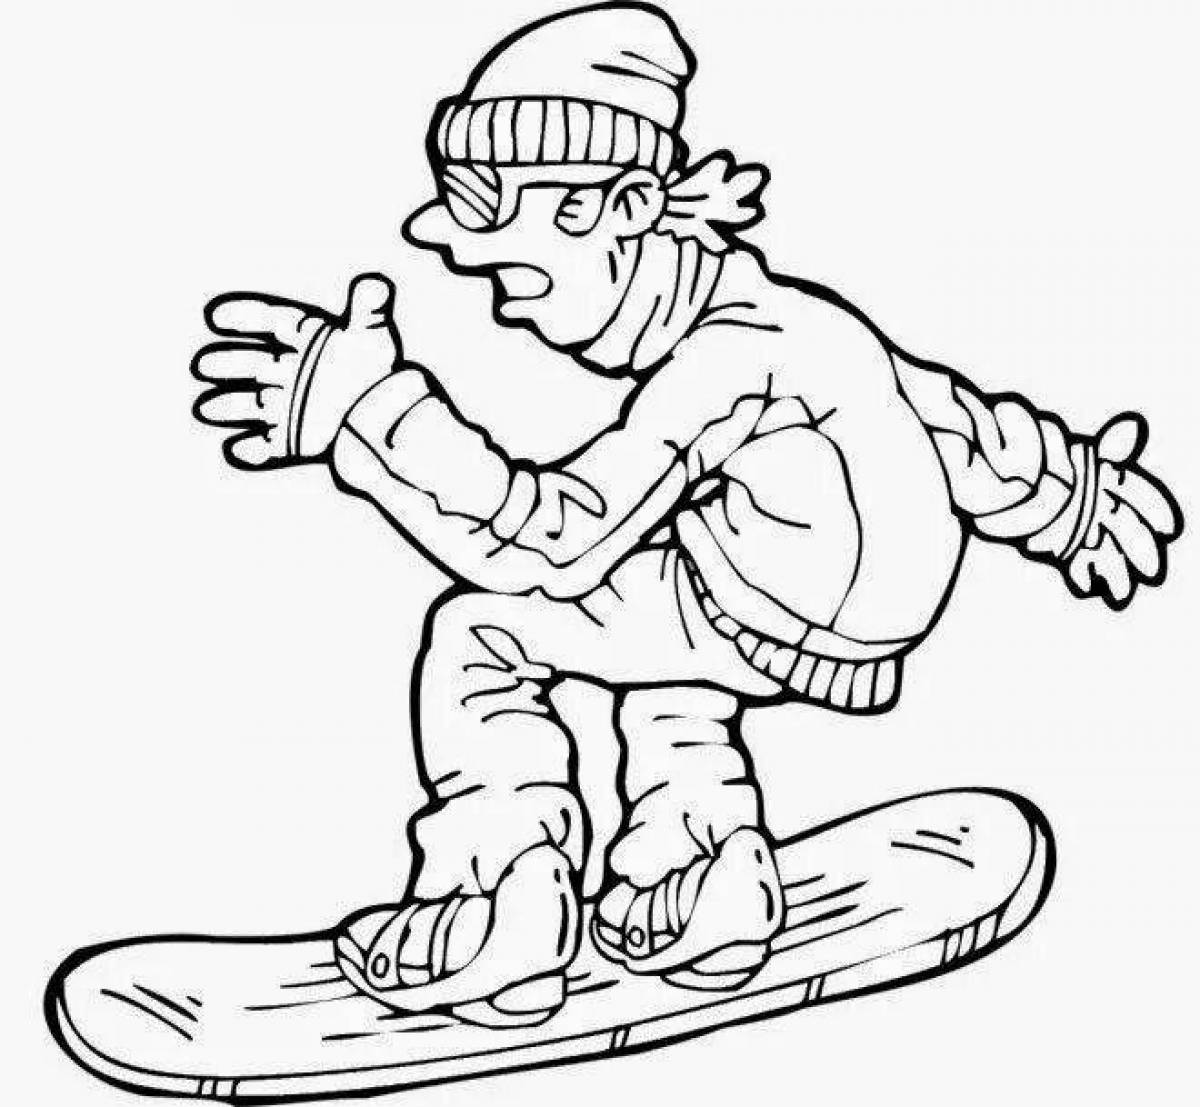 Coloring page powerful snowboarder